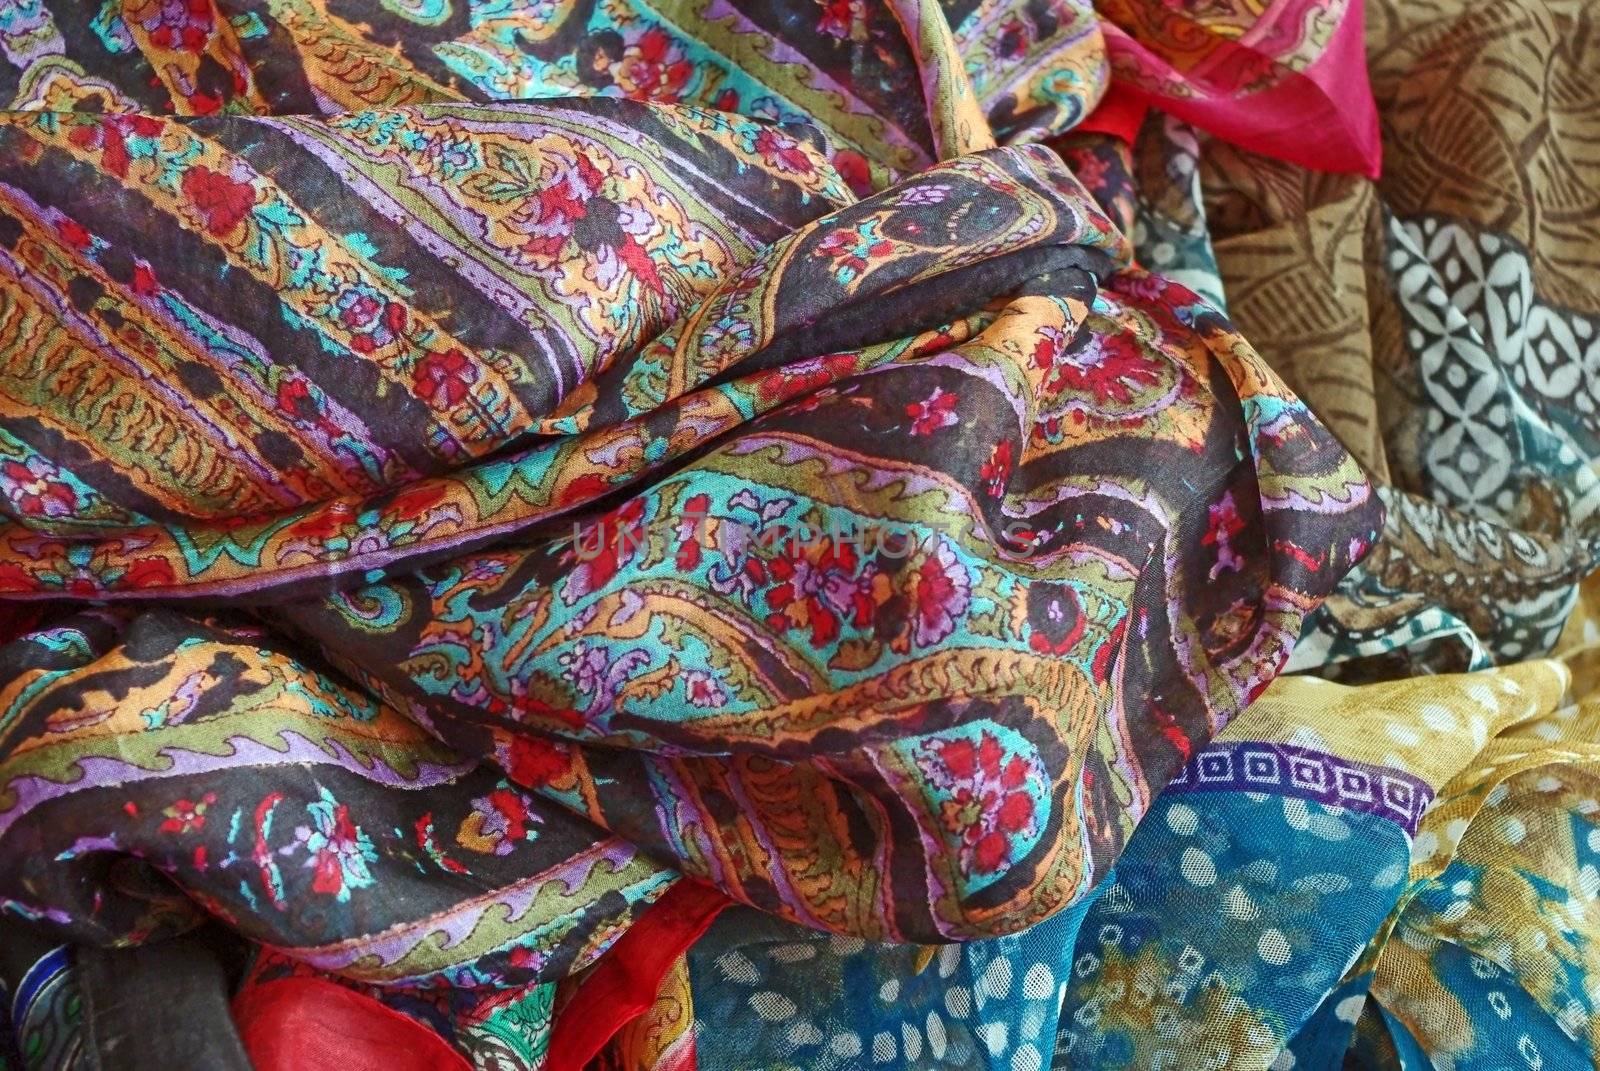 Pile of folded colour fabrics and shawls (scarfs) at the market